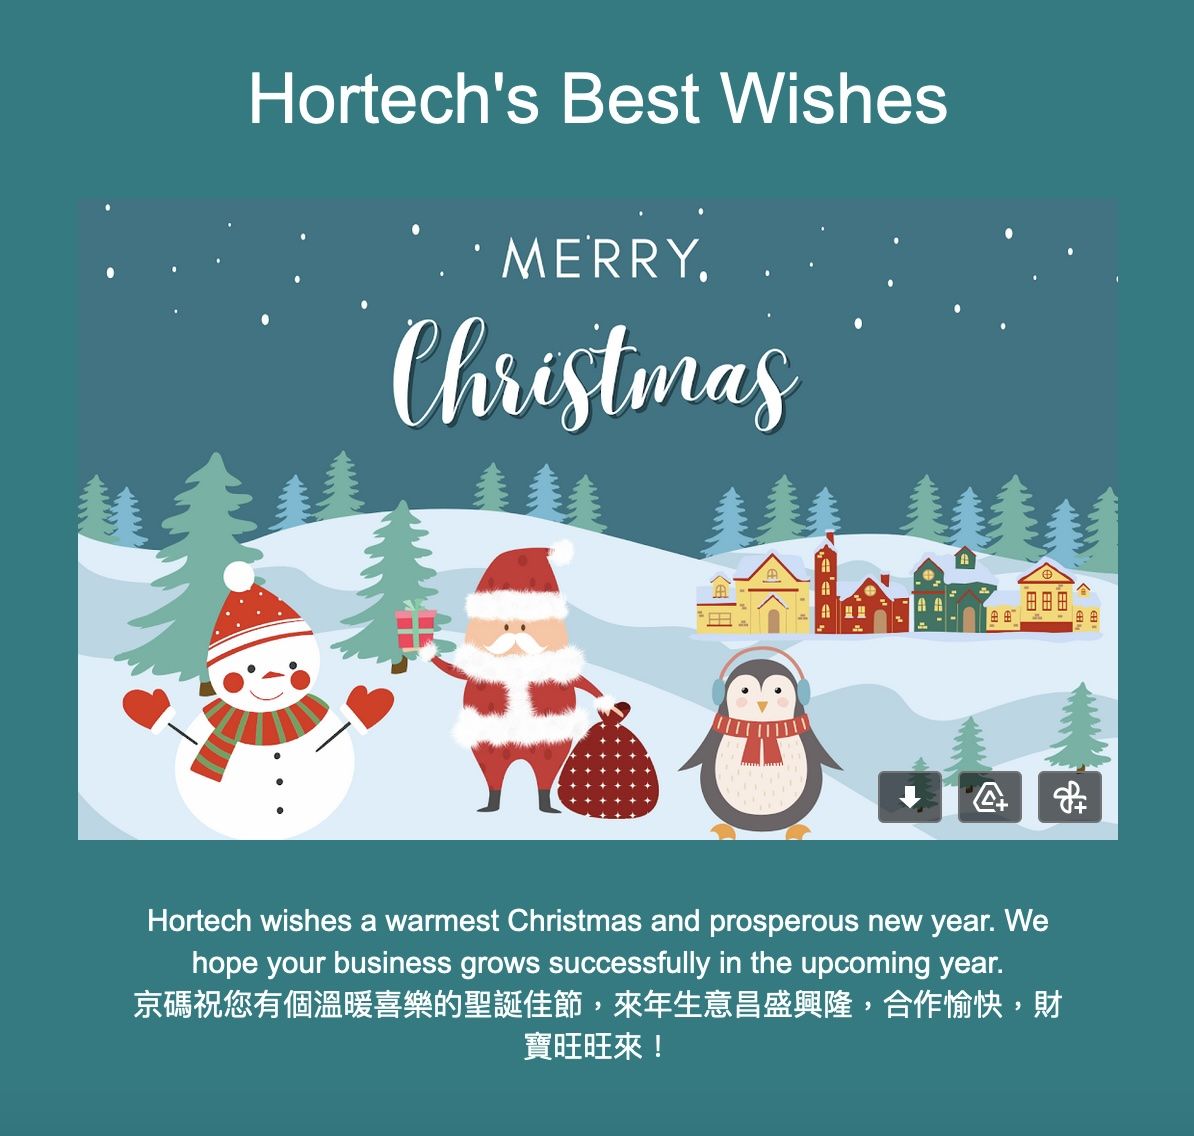 Hortech wishes you a Merry Christmas and happy new year.